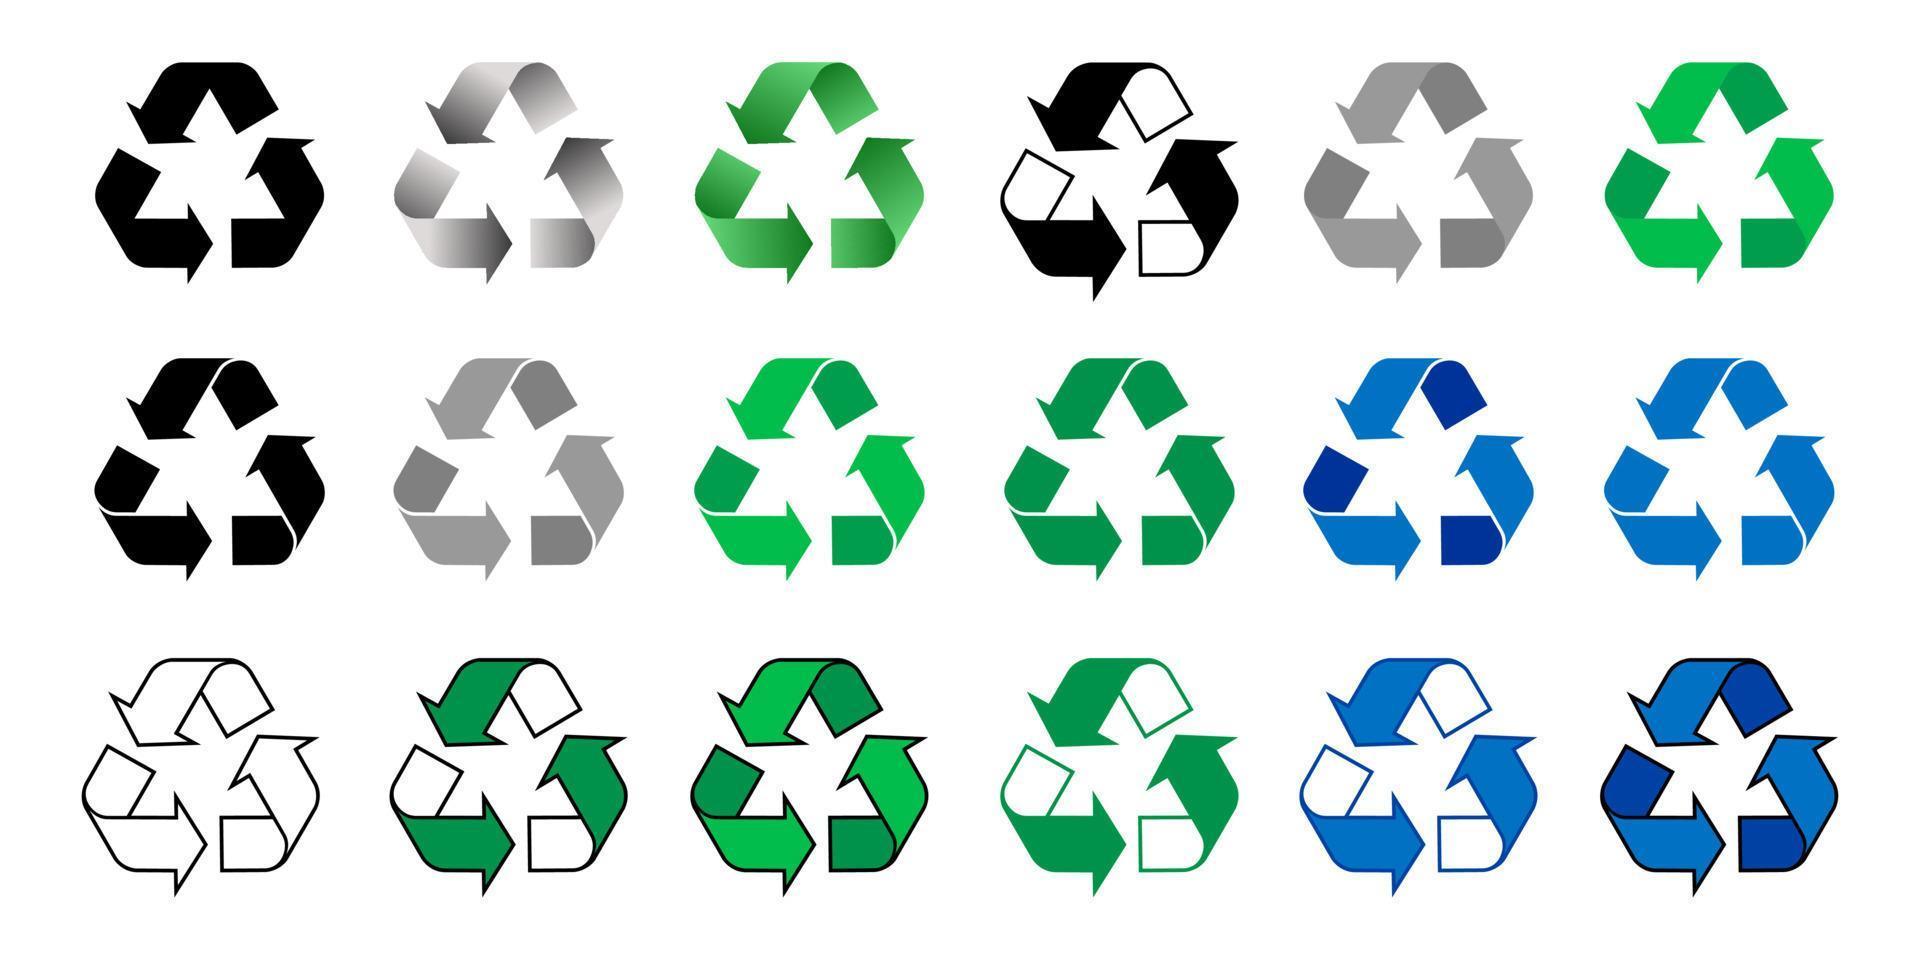 Recycle icon. Arrows recycle eco symbol vector design illustration. Recycling icon collection.